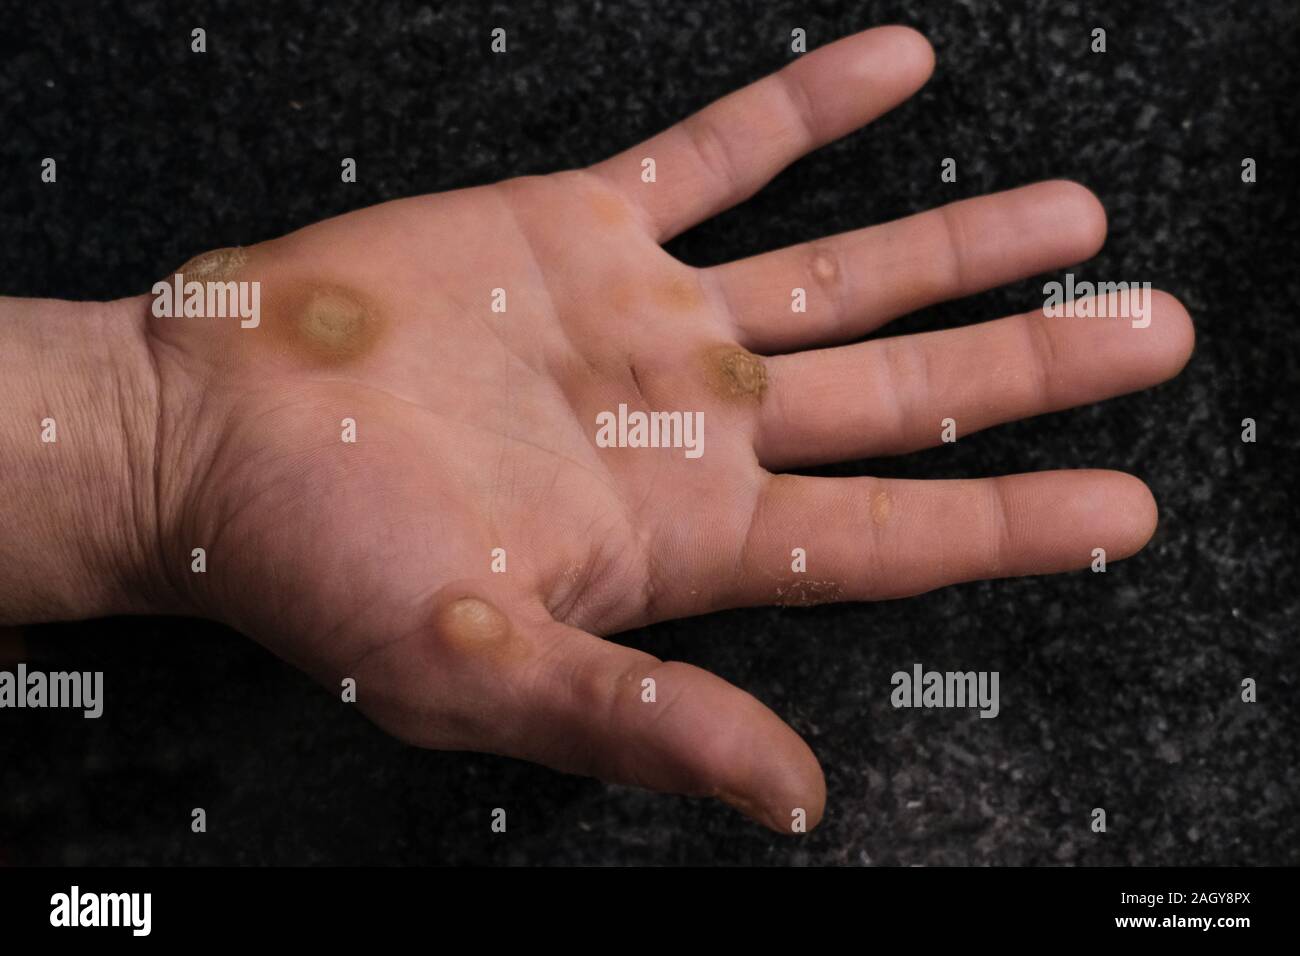 Dermatological issue,verruca warts,on worker man hand,medical healthcare concept Stock Photo